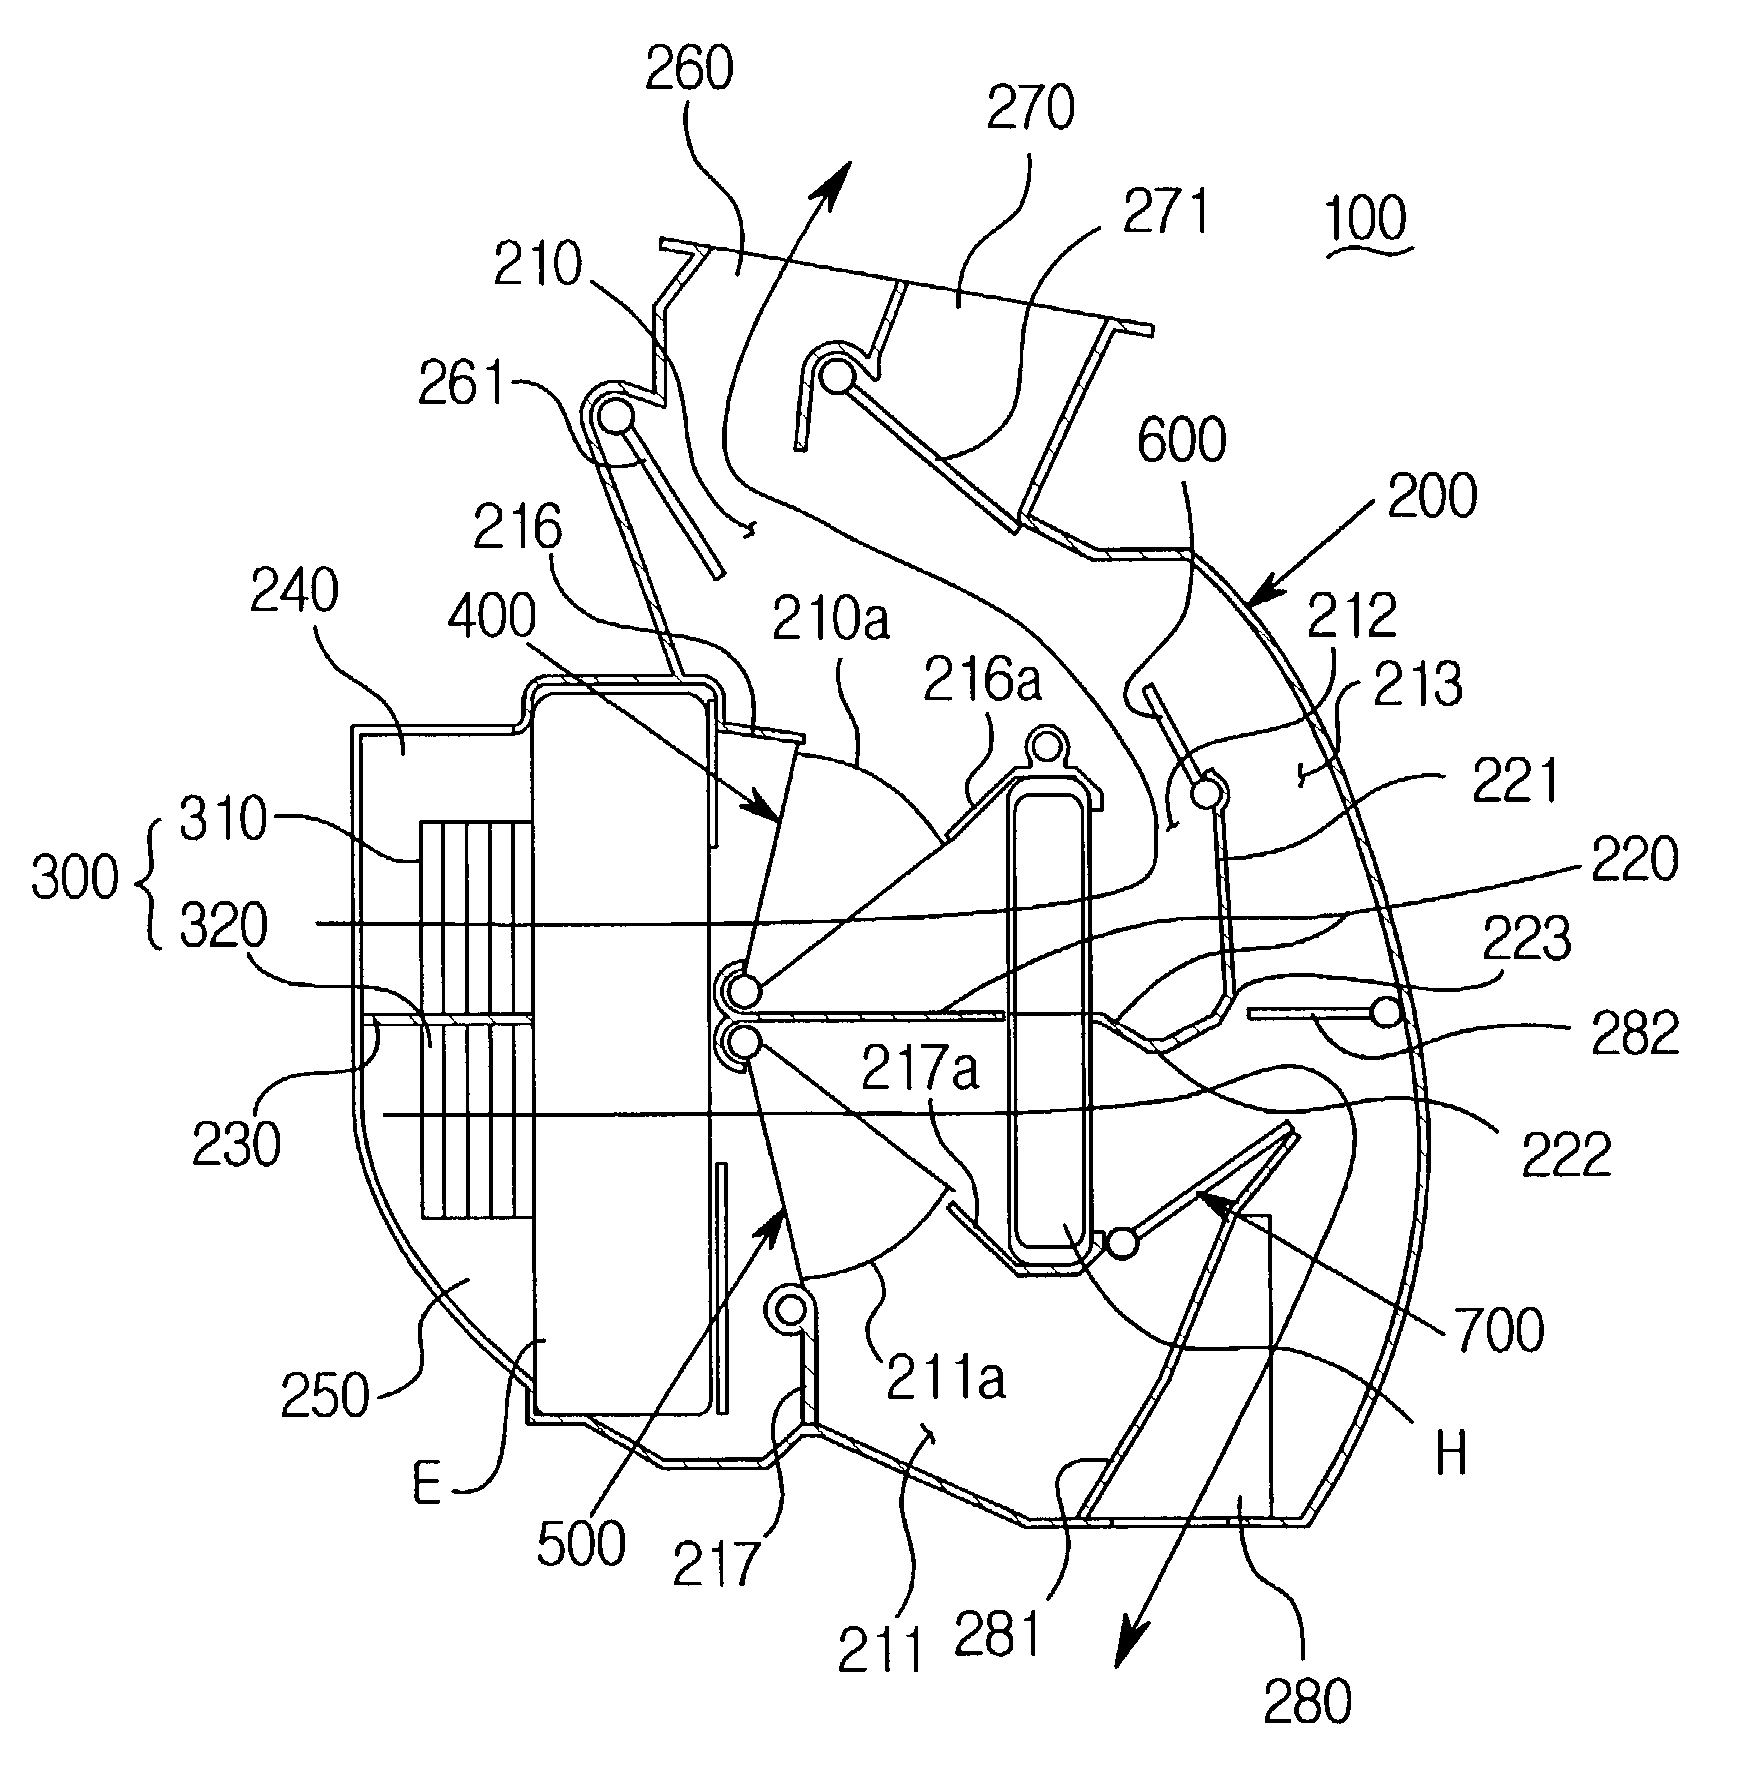 Air conditioning system for a vehicle